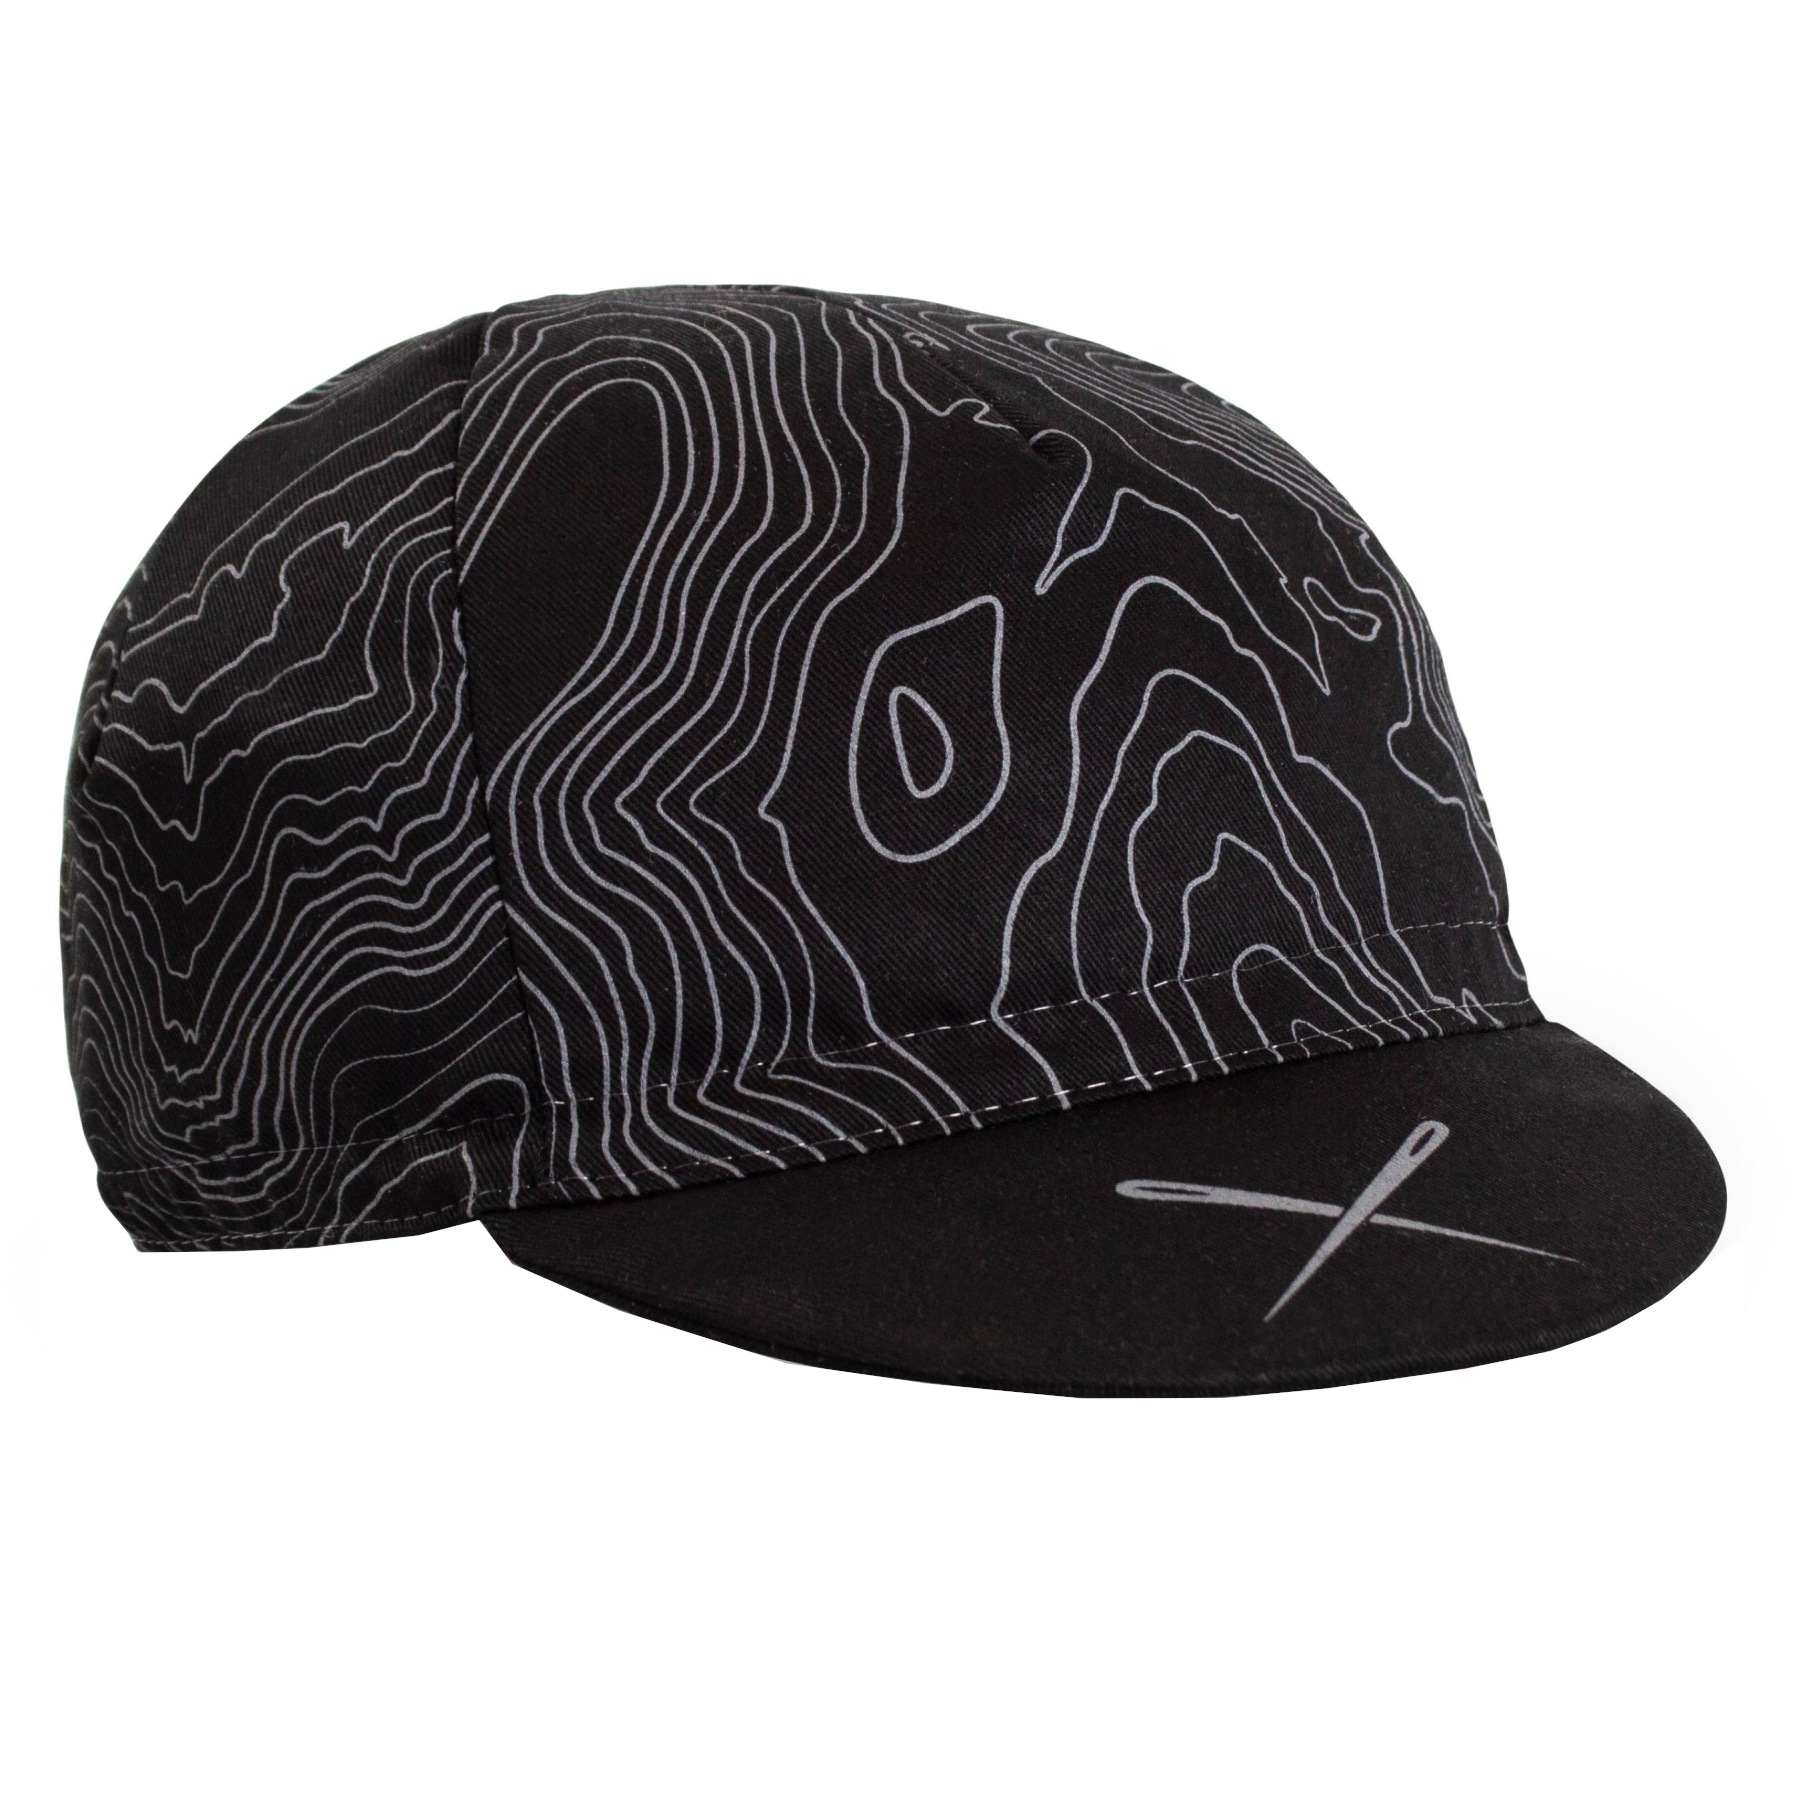 Picture of Restrap Yorkshire Contours Cyling Cap - black